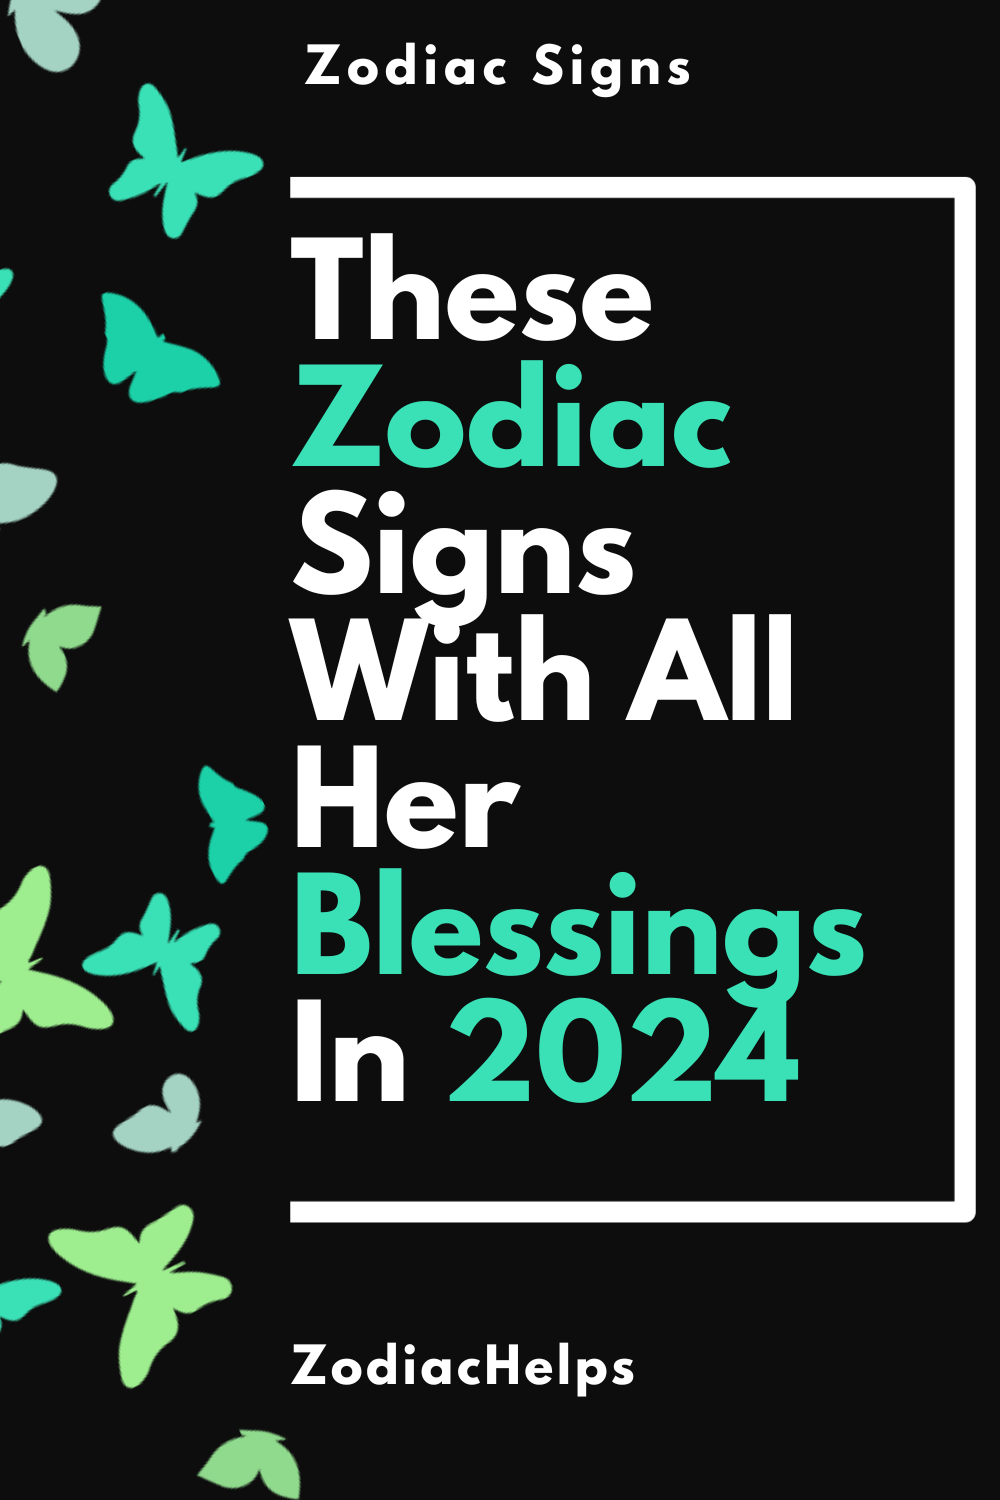 These Zodiac Signs With All Her Blessings In 2024